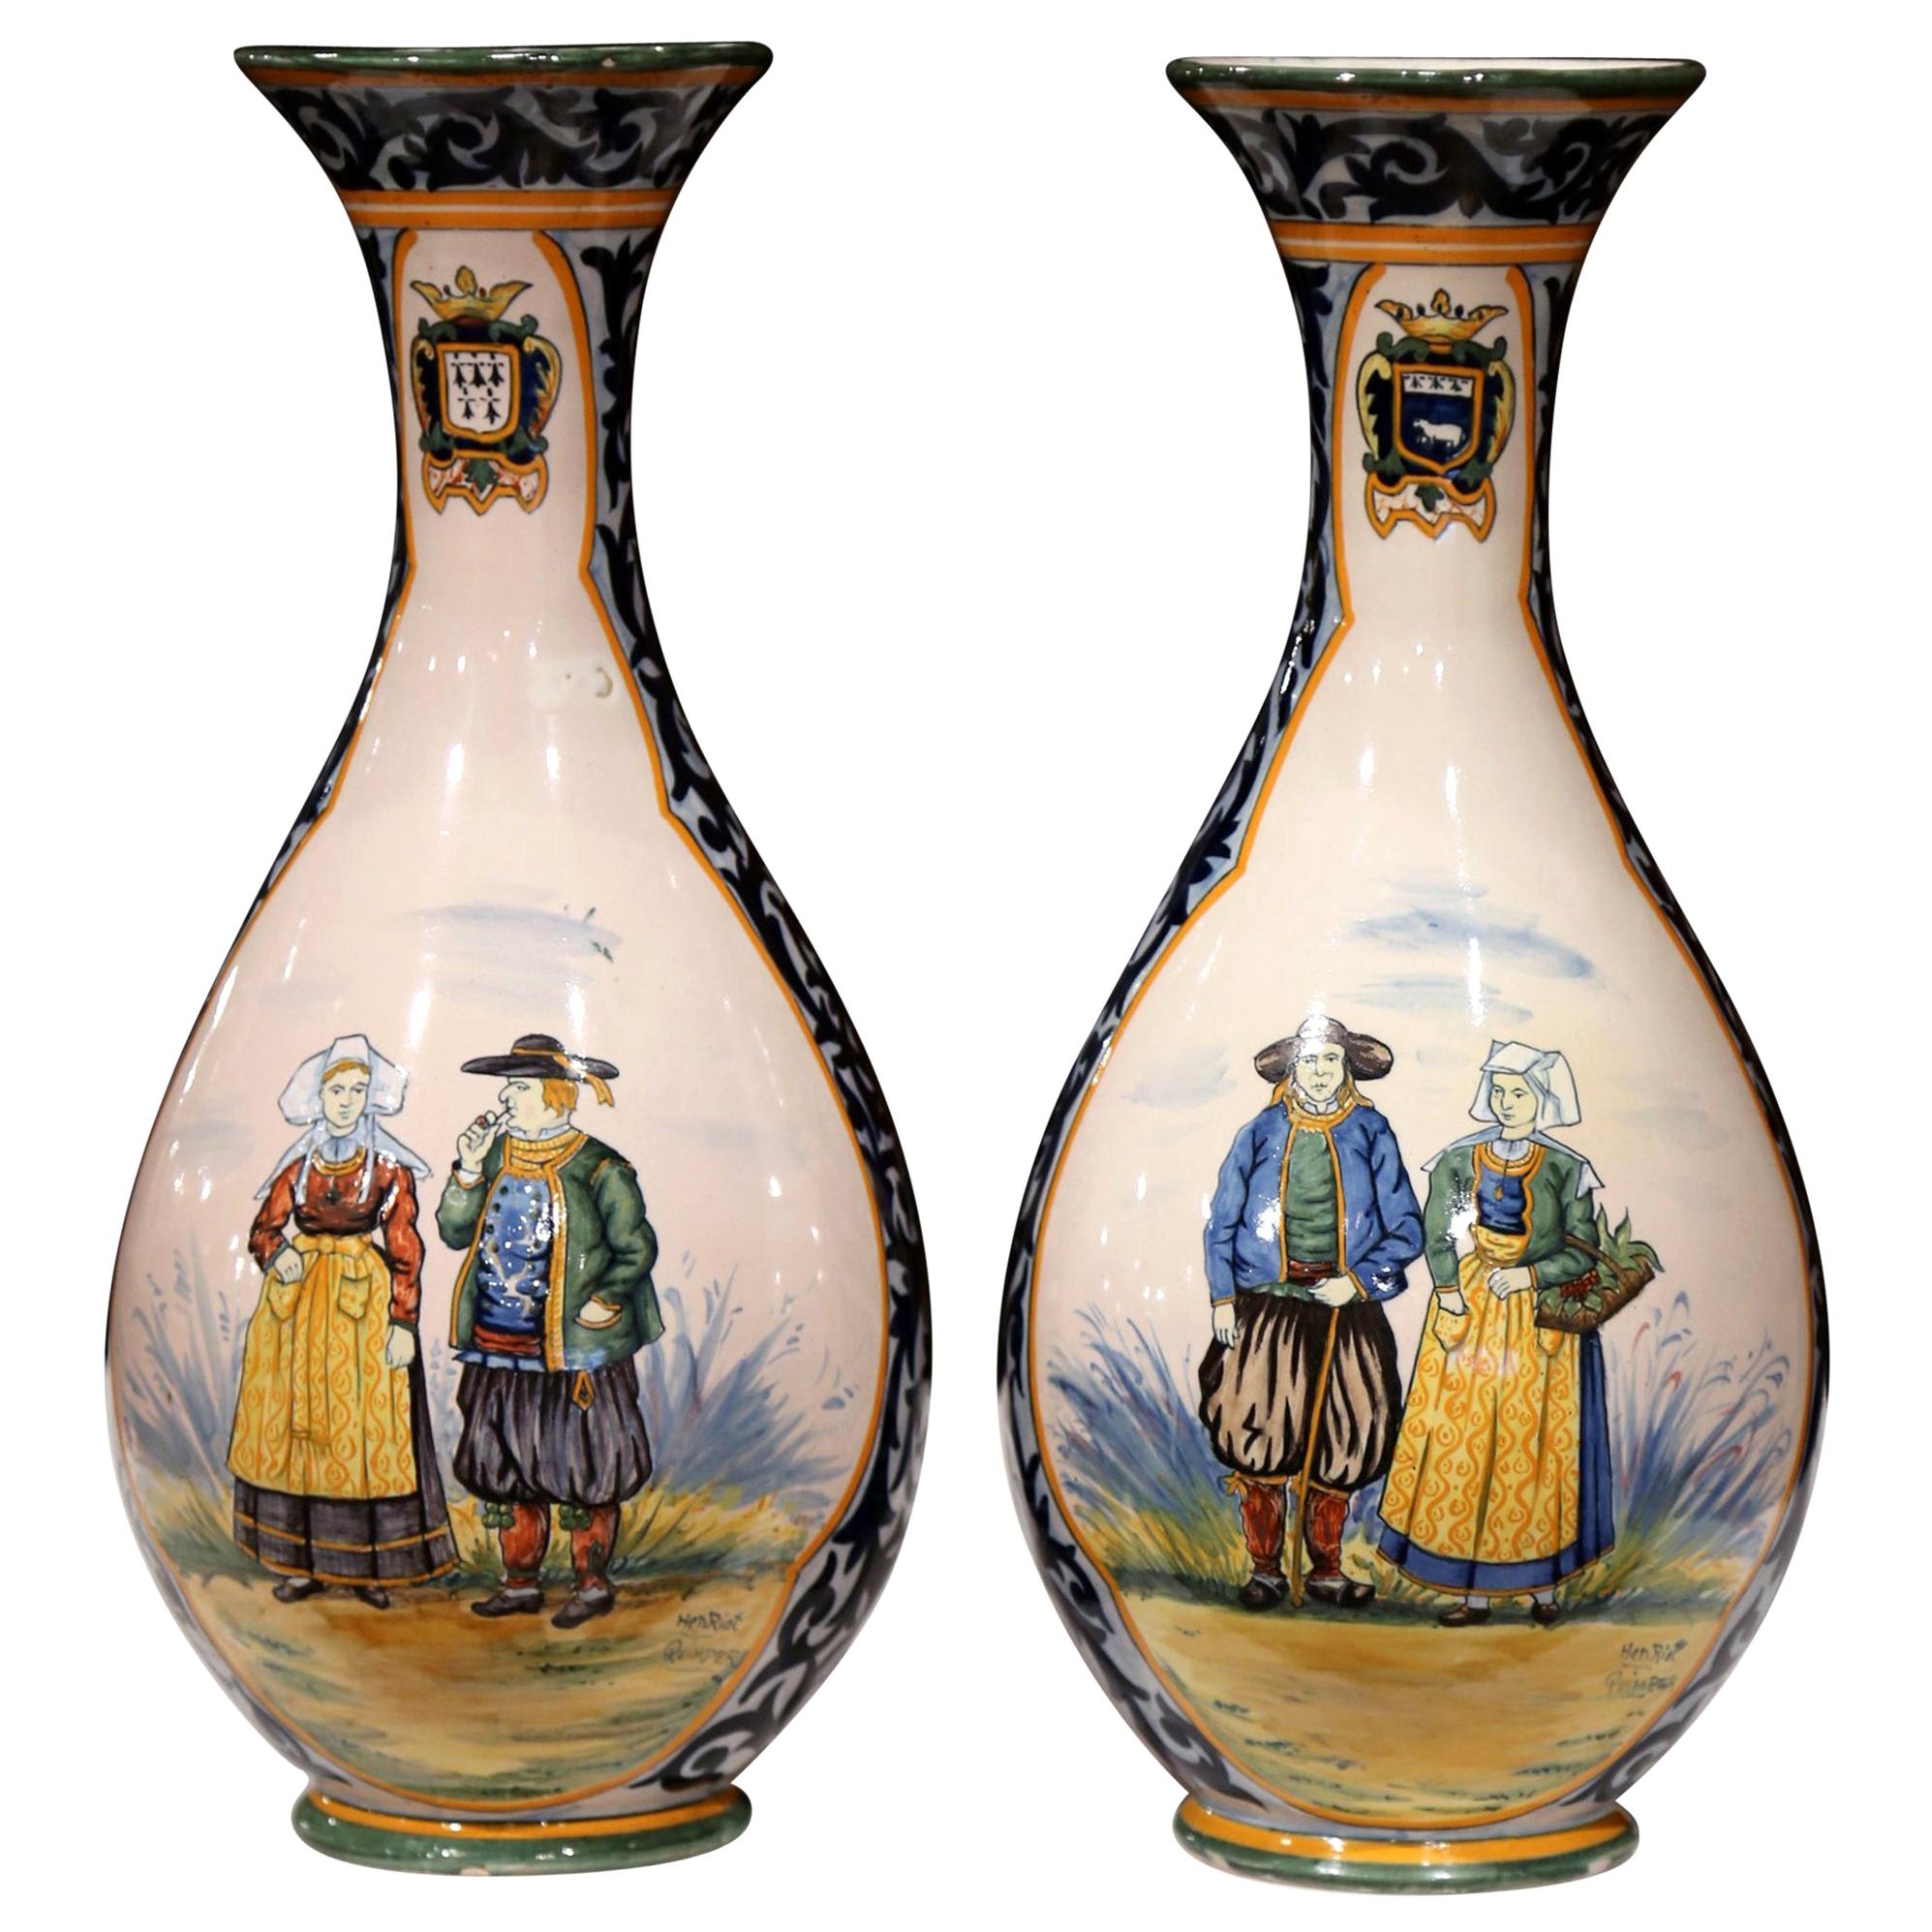 Pair of 19th Century French Hand Painted Faience Vases Signed Henriot Quimper